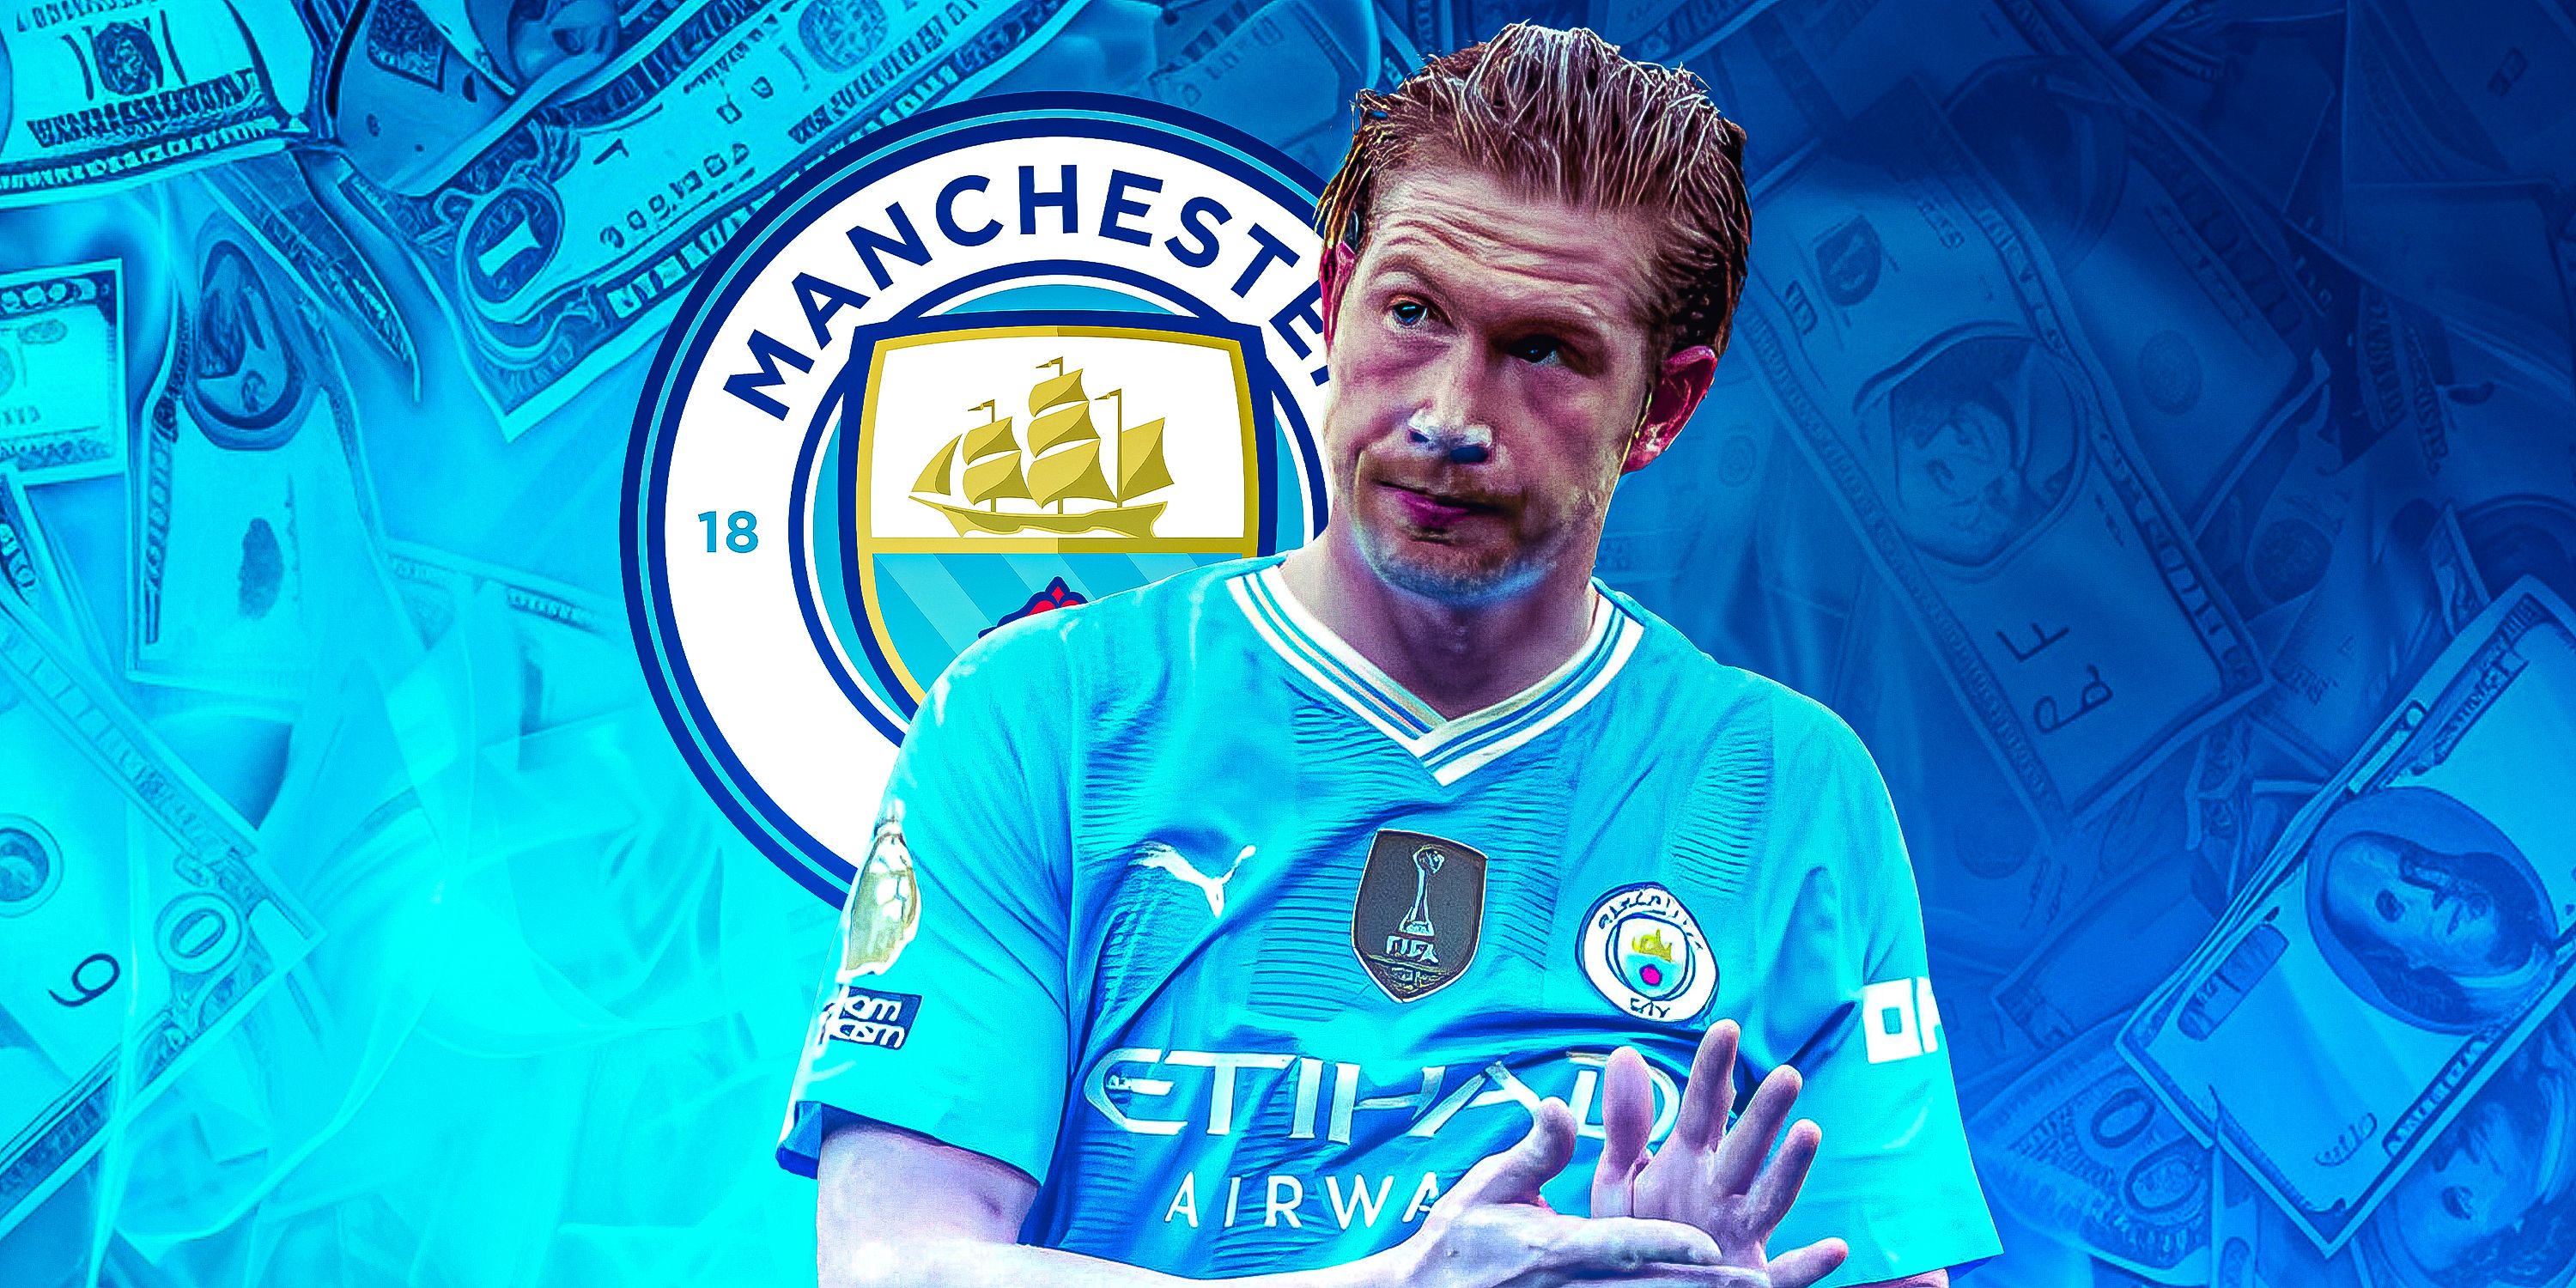 Manchester City's Kevin de Bruyne in front of the club crest.